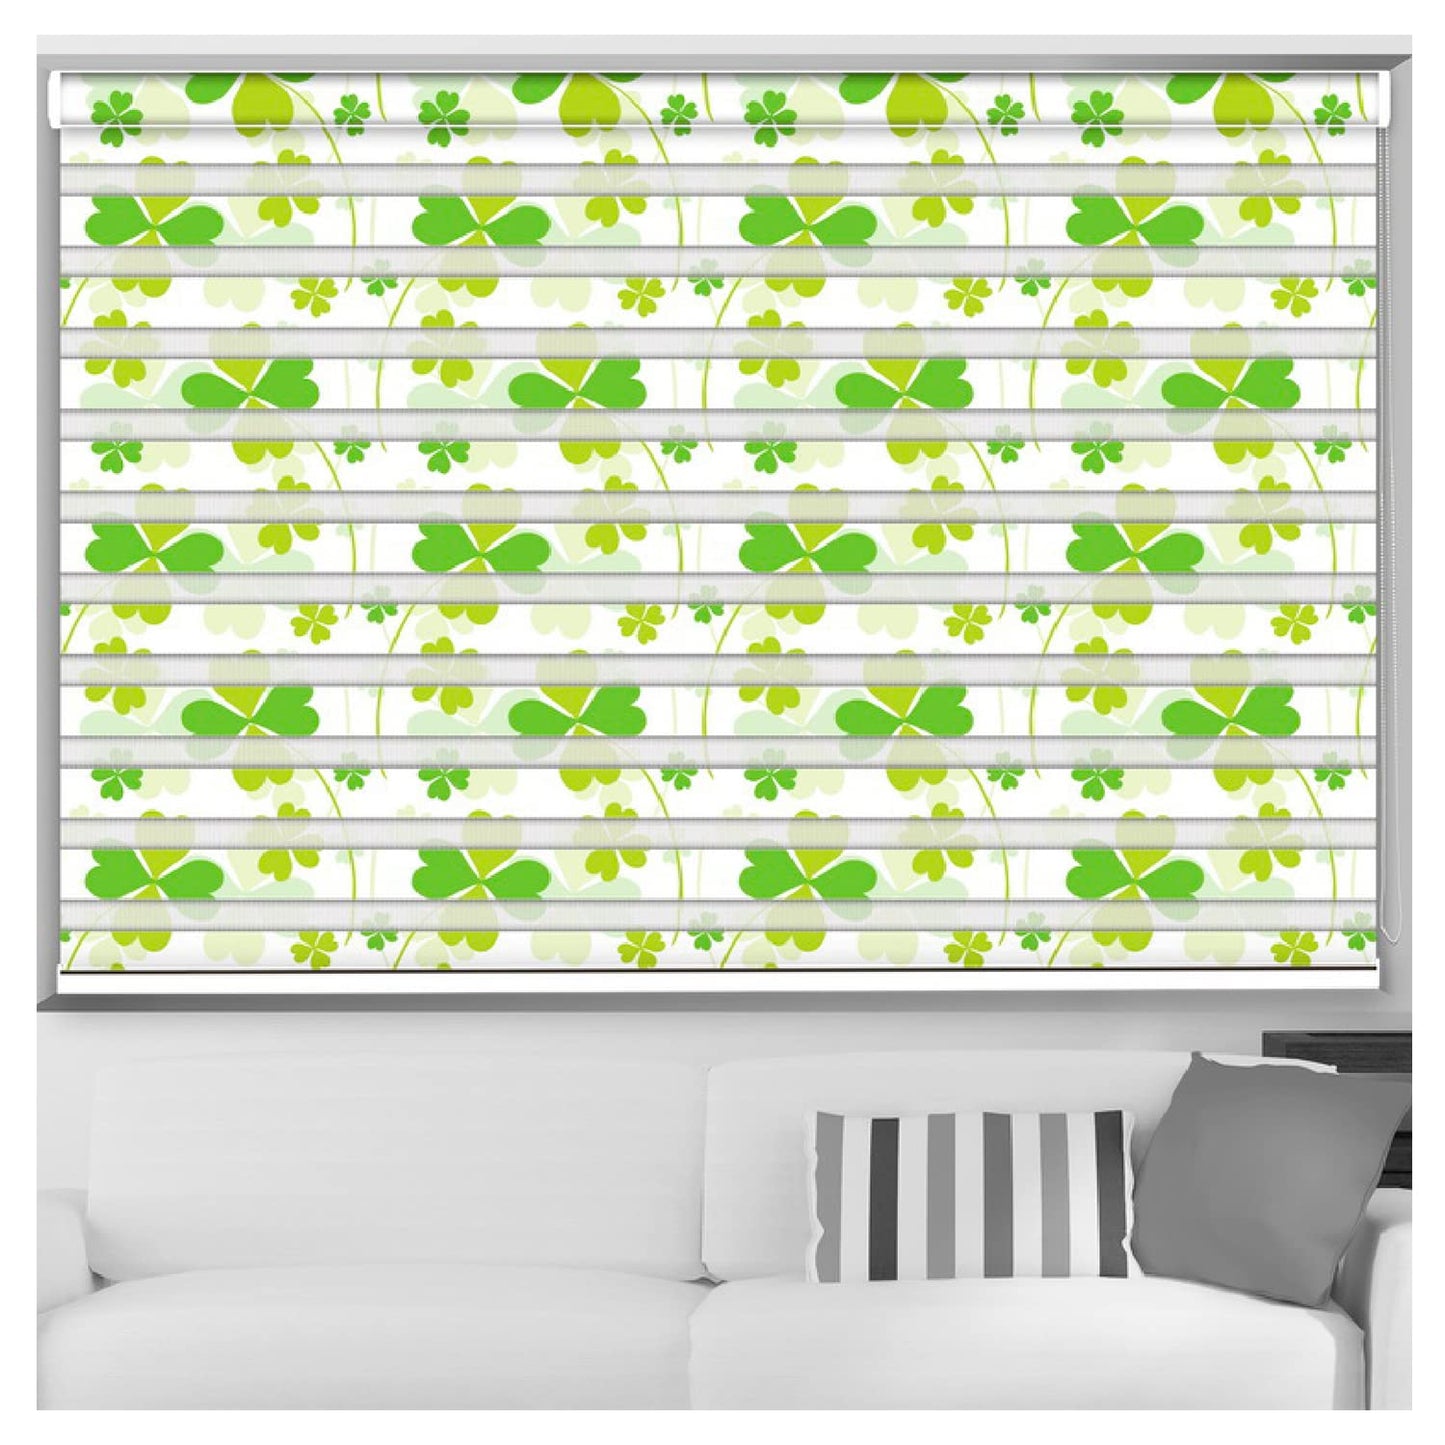 Zebra Blinds for Windows and Doors with Dual Shade, Horizontal Stripes, Blinds for Home & Office (Customized Size, Green Leaves)